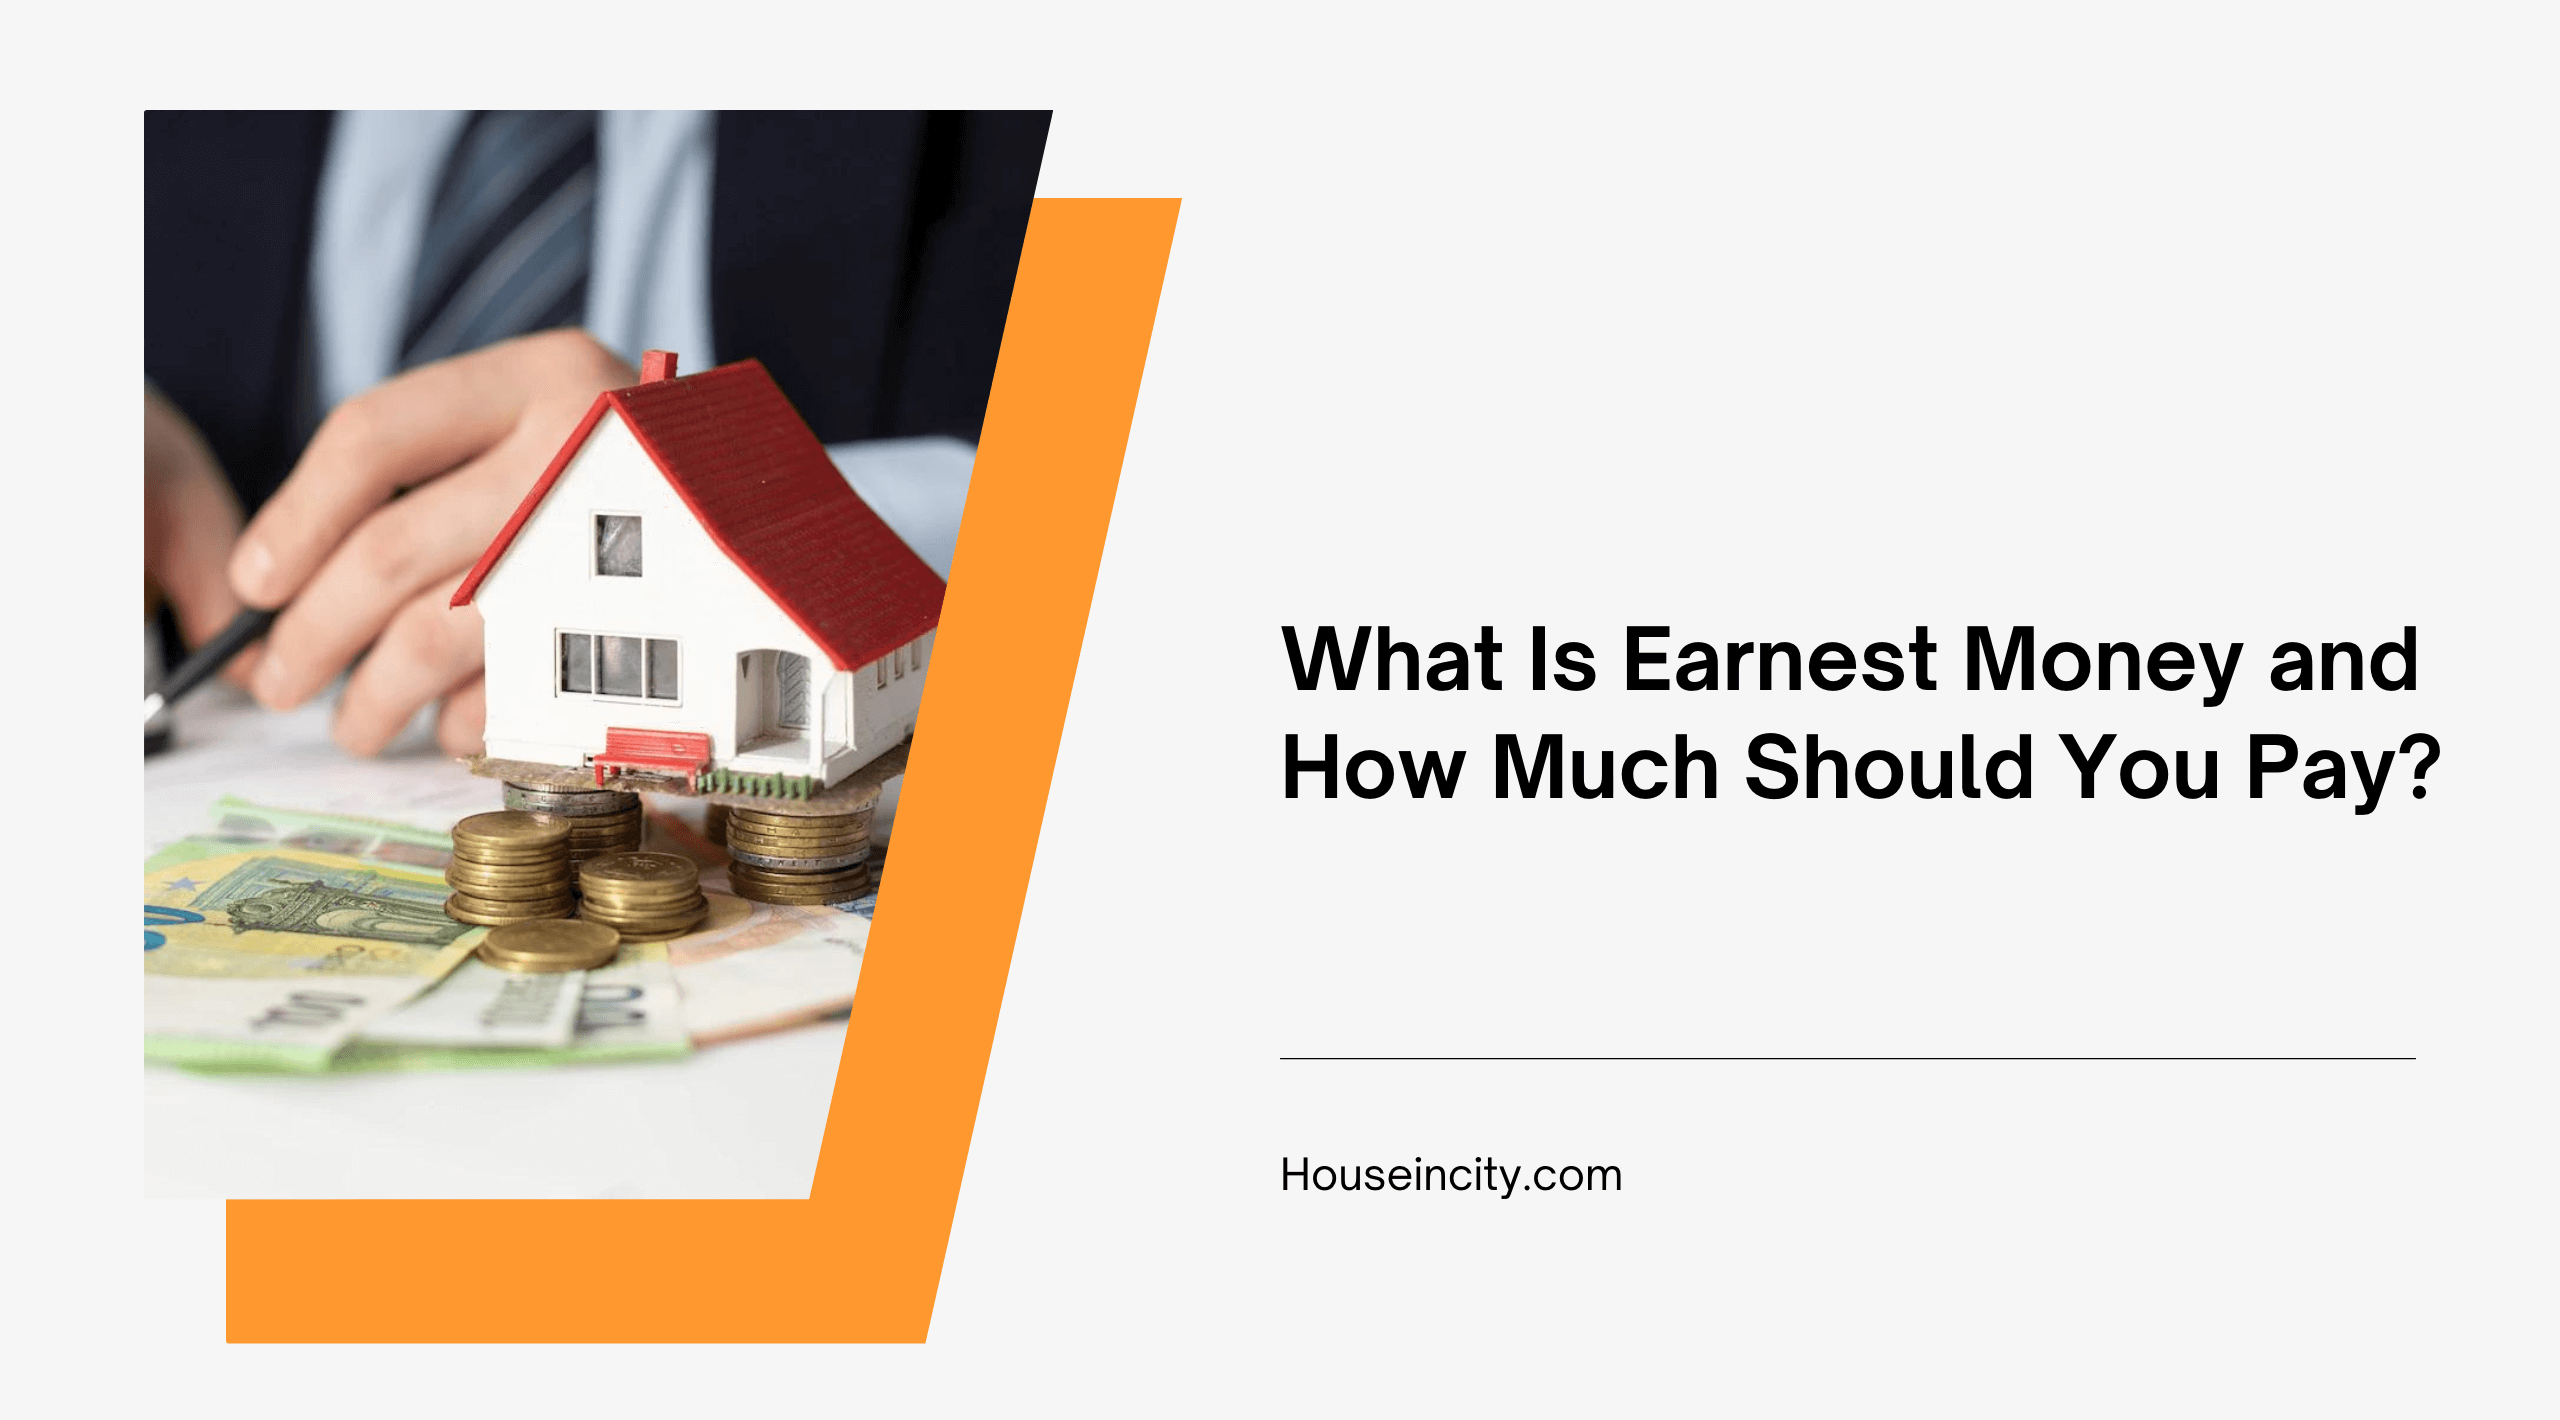 What Is Earnest Money and How Much Should You Pay?